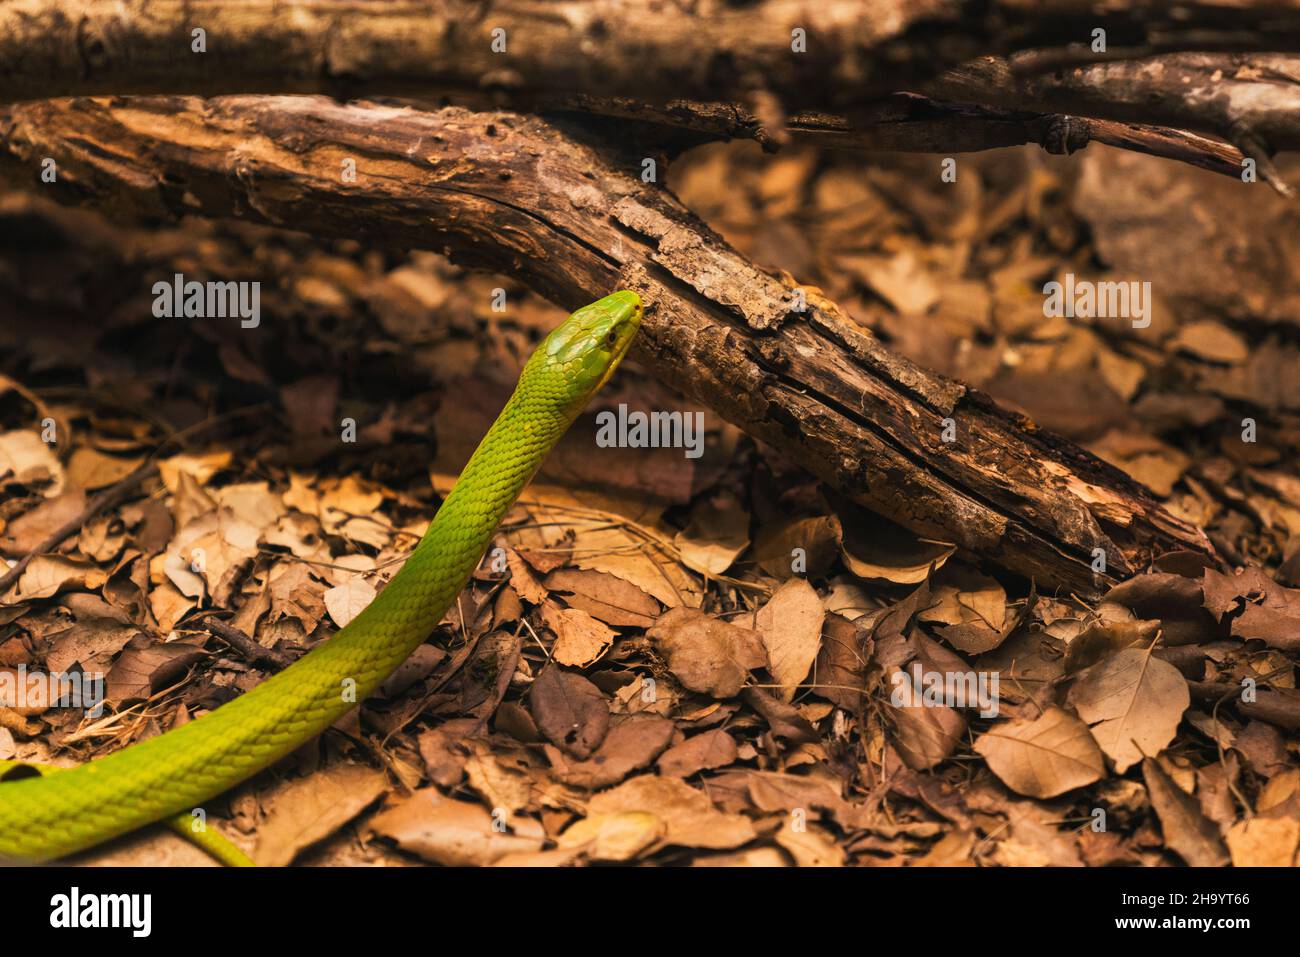 Close-up shot of a green snake on the fallen leaves on the ground Stock Photo